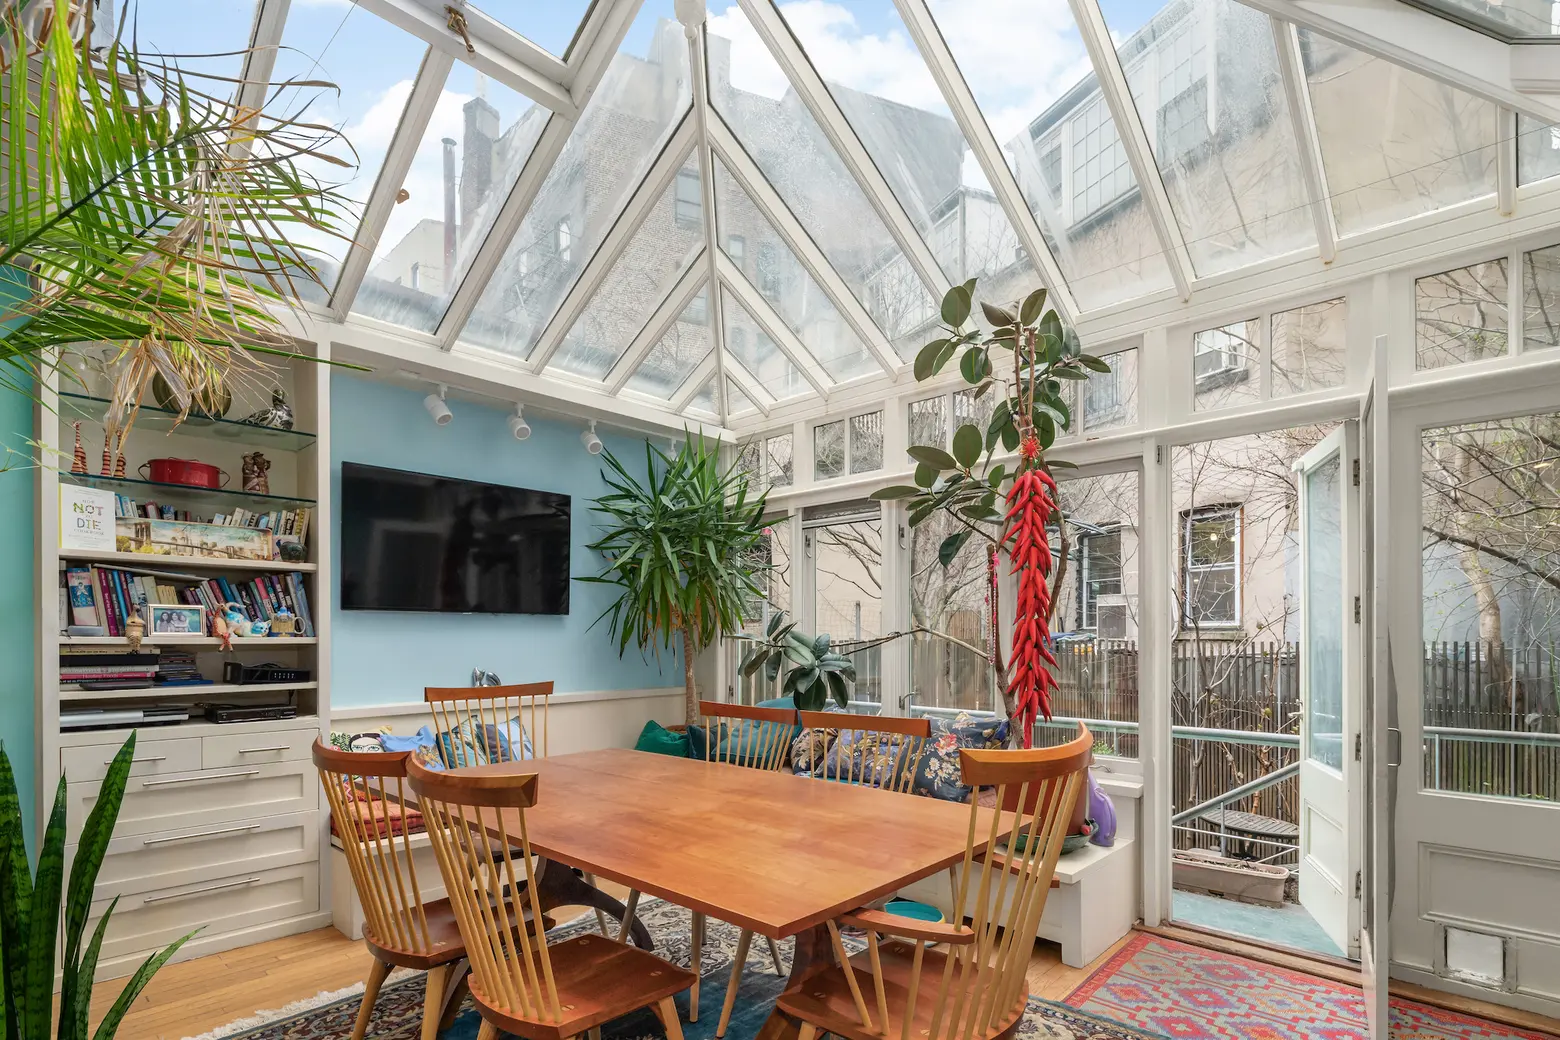 Dine and stargaze from a glass atrium in this historic $7.75M Village townhouse